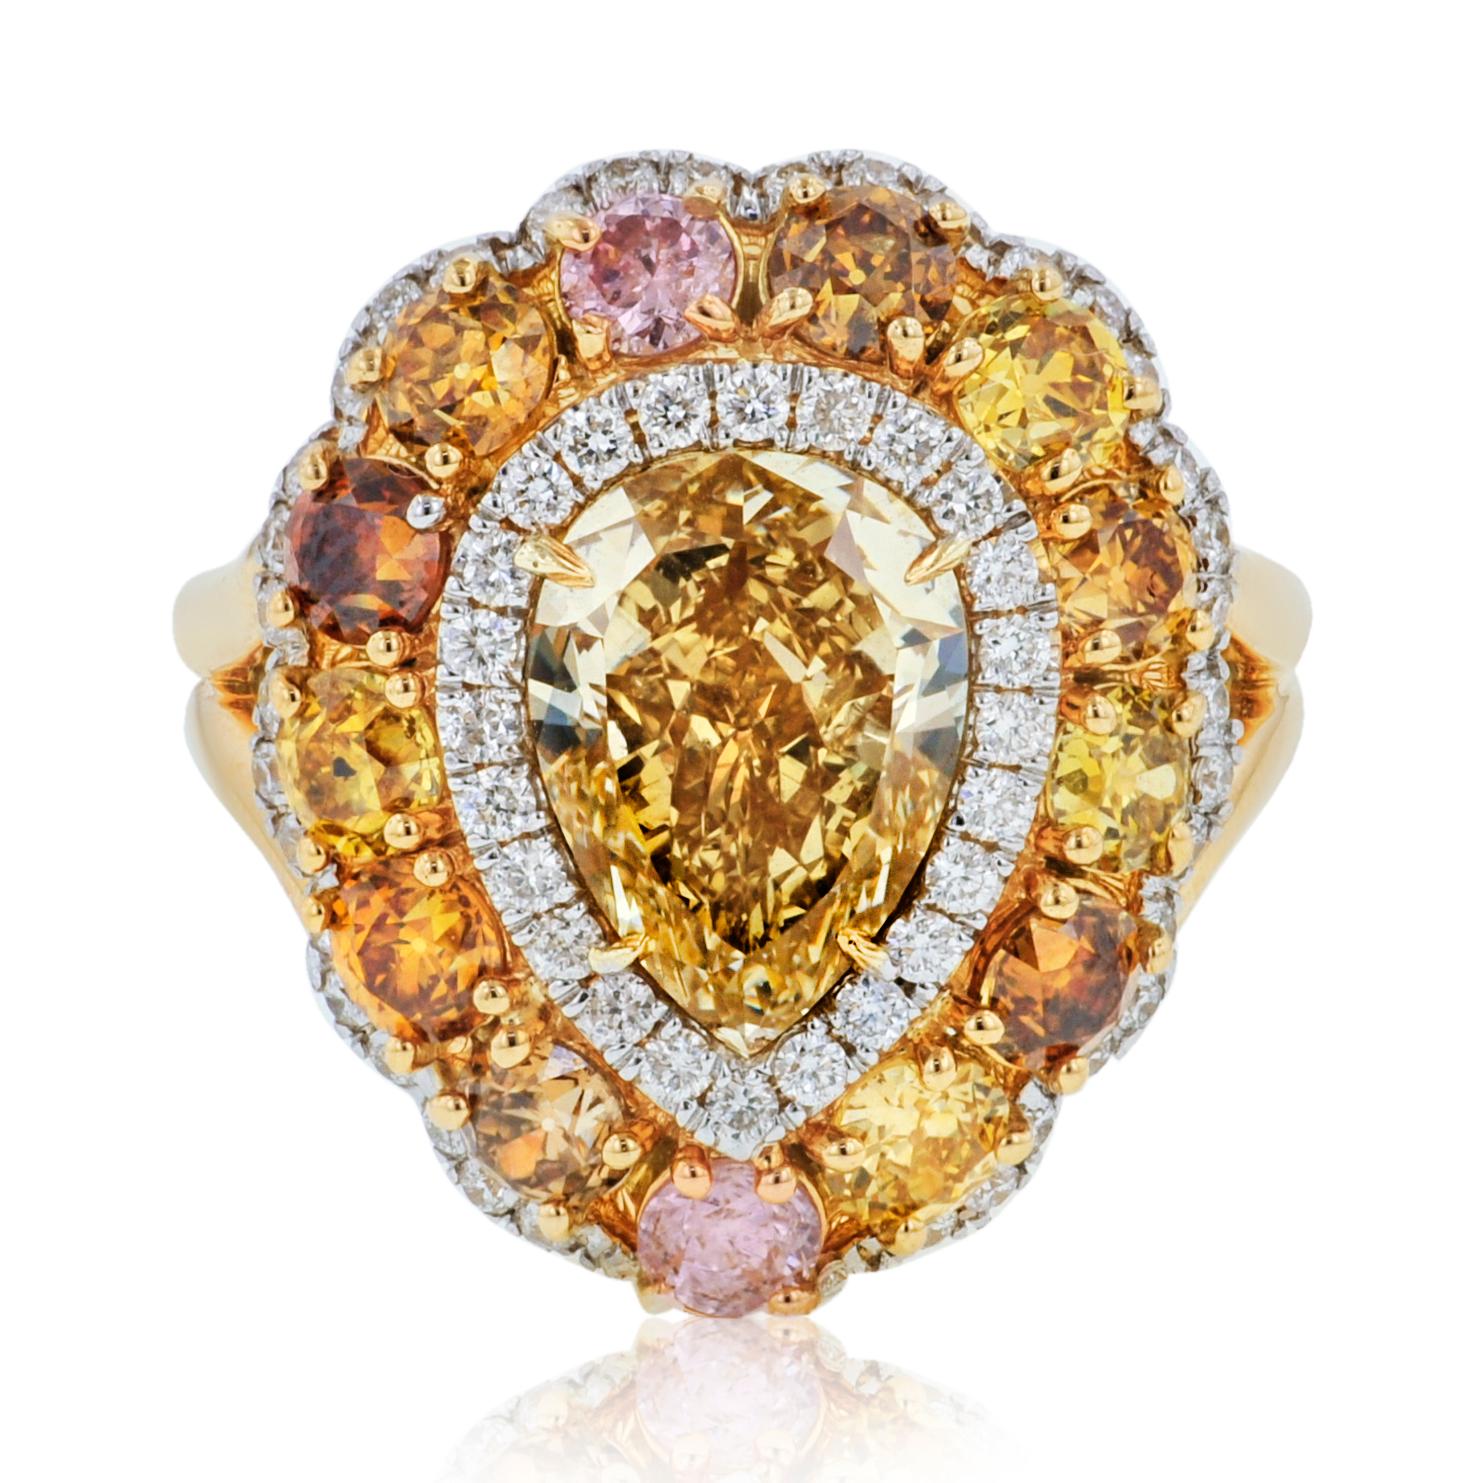 18kt yellow and white gold diamond ring with center gia certified 3.40ct pear shape fancy brownish yellow, vs2 in clarity  diamond (psc268) set with 2.57 carats of fancy color diamonds. 
